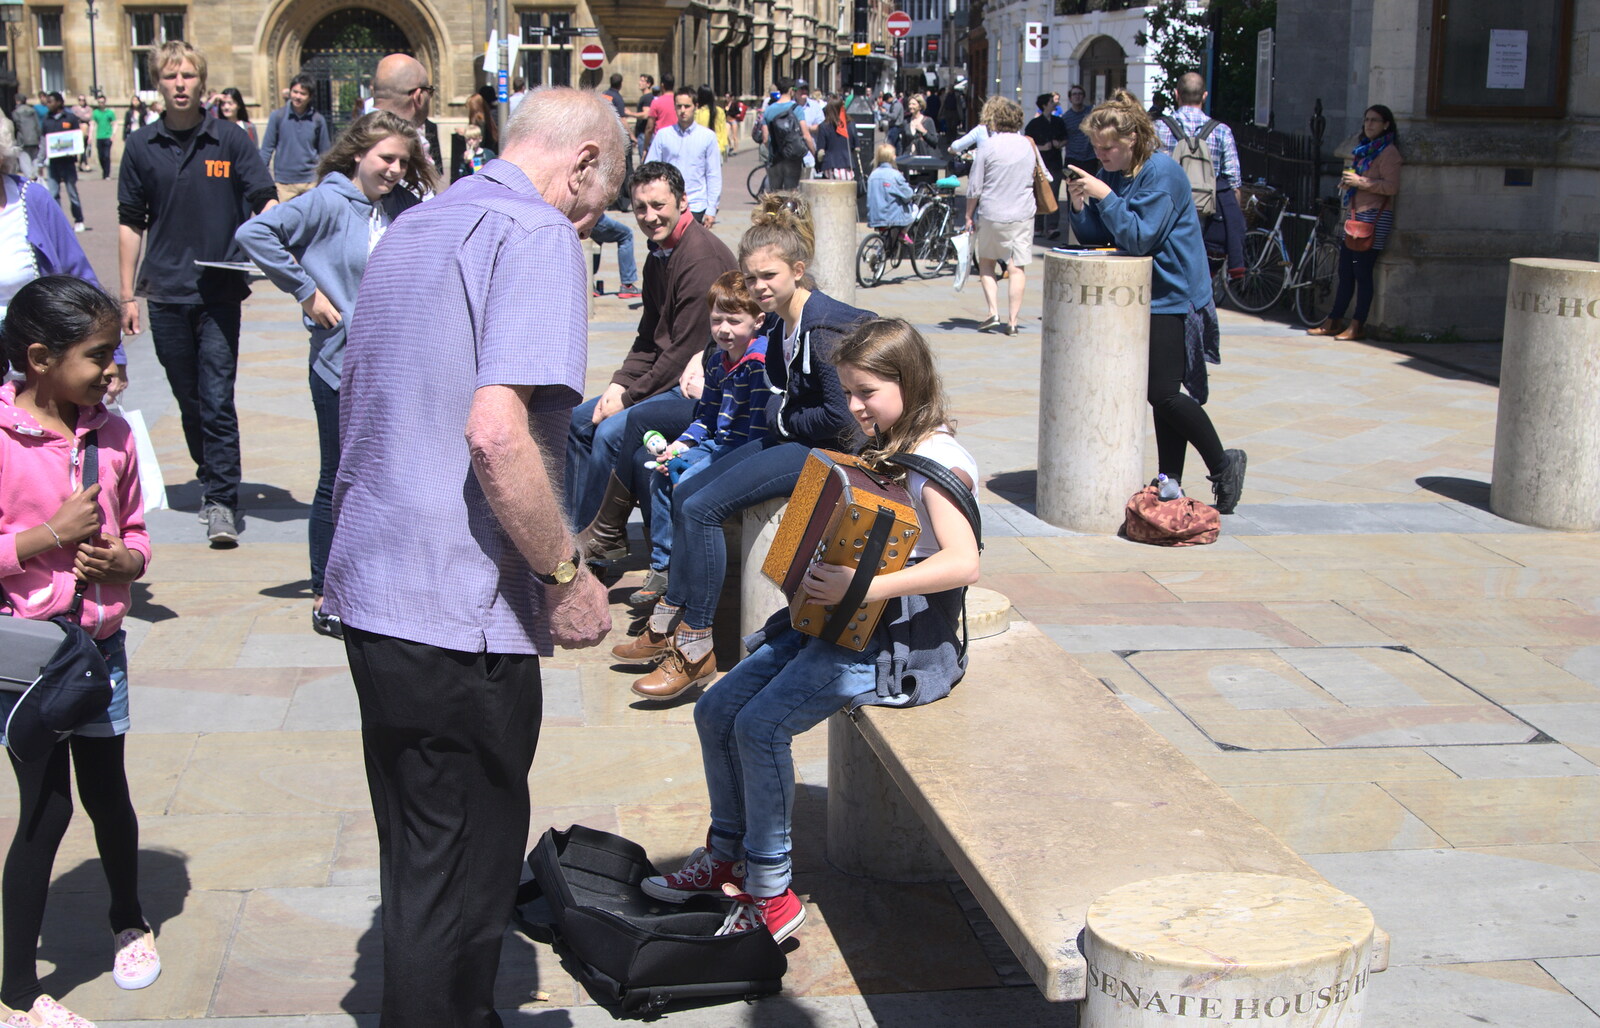 Grandad gives some money to accordion girl from Punting With Grandad, Cambridge, Cambridgeshire - 6th June 2015